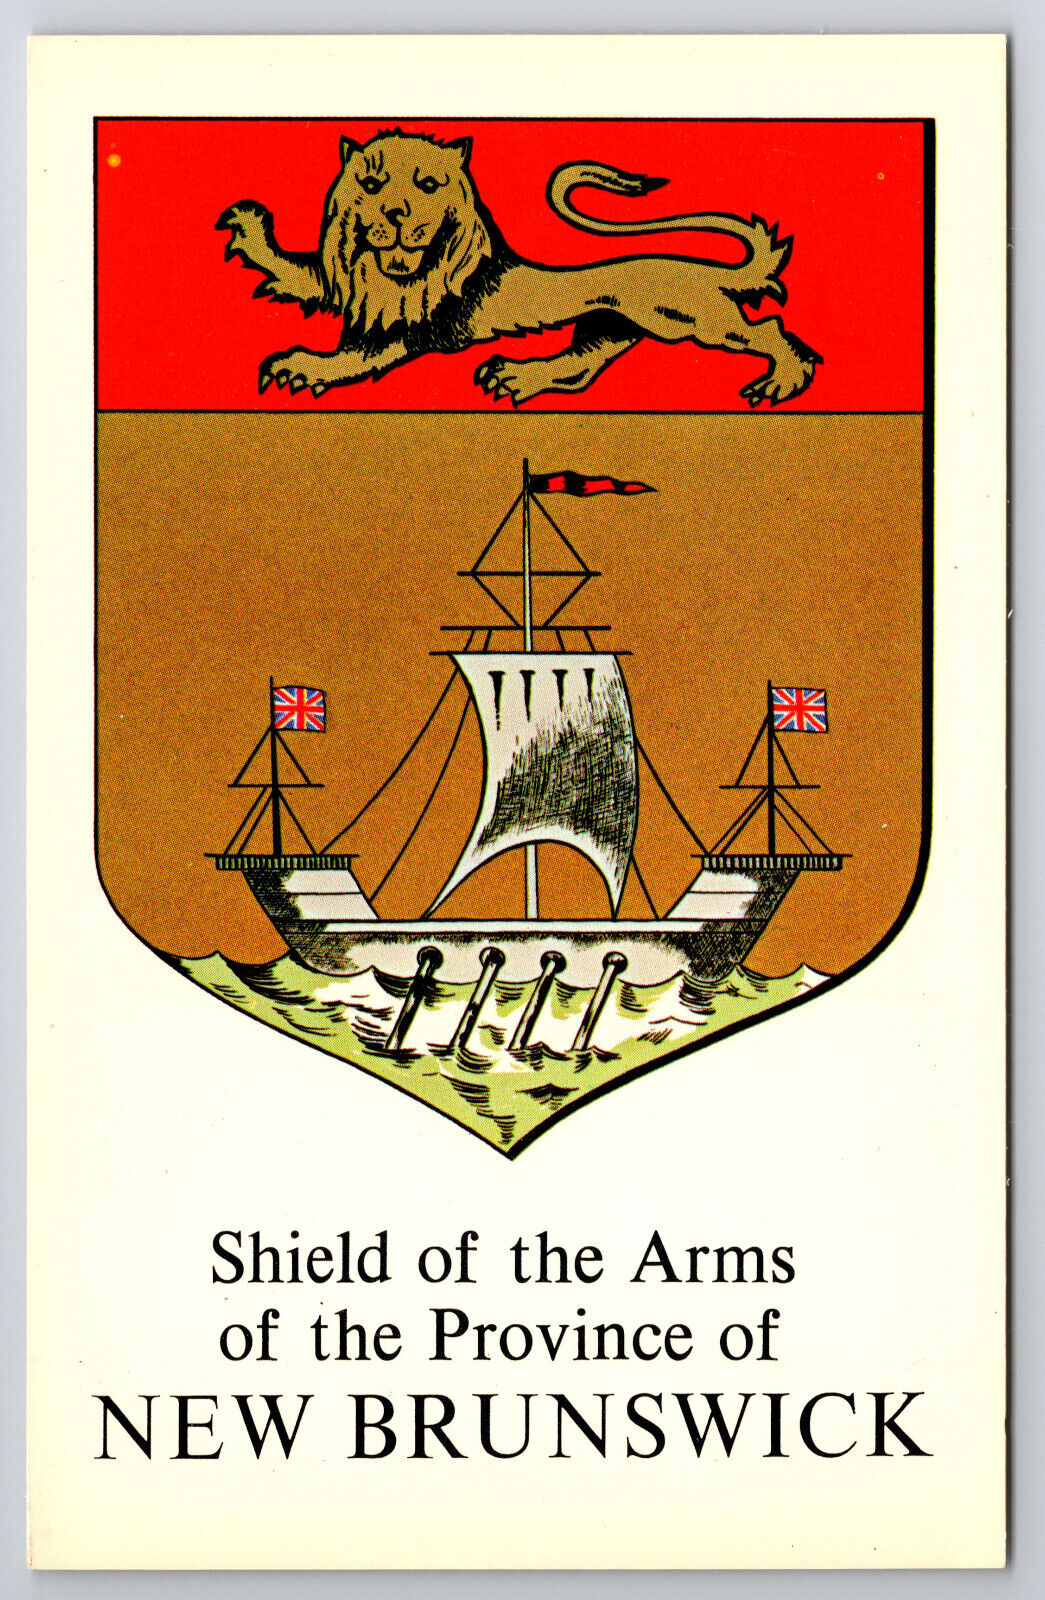 Vintage Canada Postcard Shield of Arms Province of New Brunswick